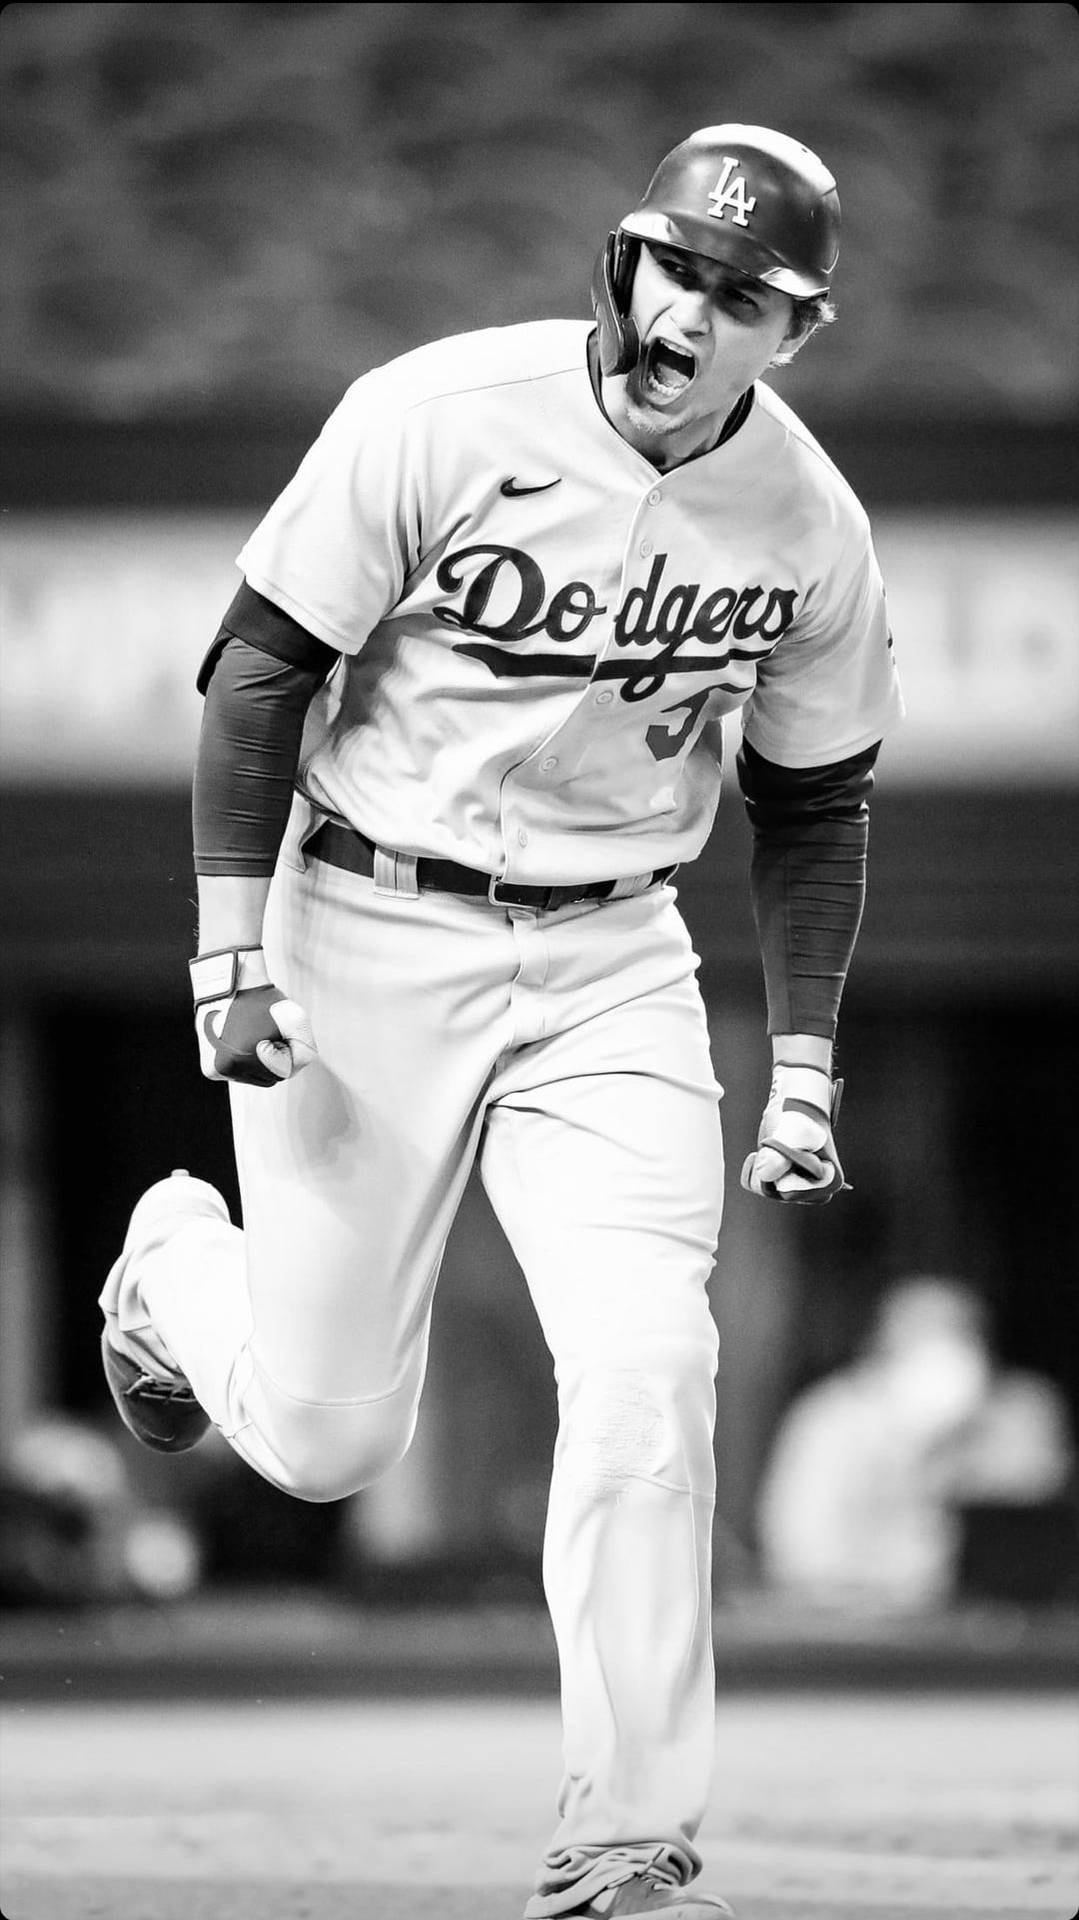 Losangeles Dodgers Corey Seager Would Be Translated To German As: Los Angeles Dodgers Corey Seager Wallpaper